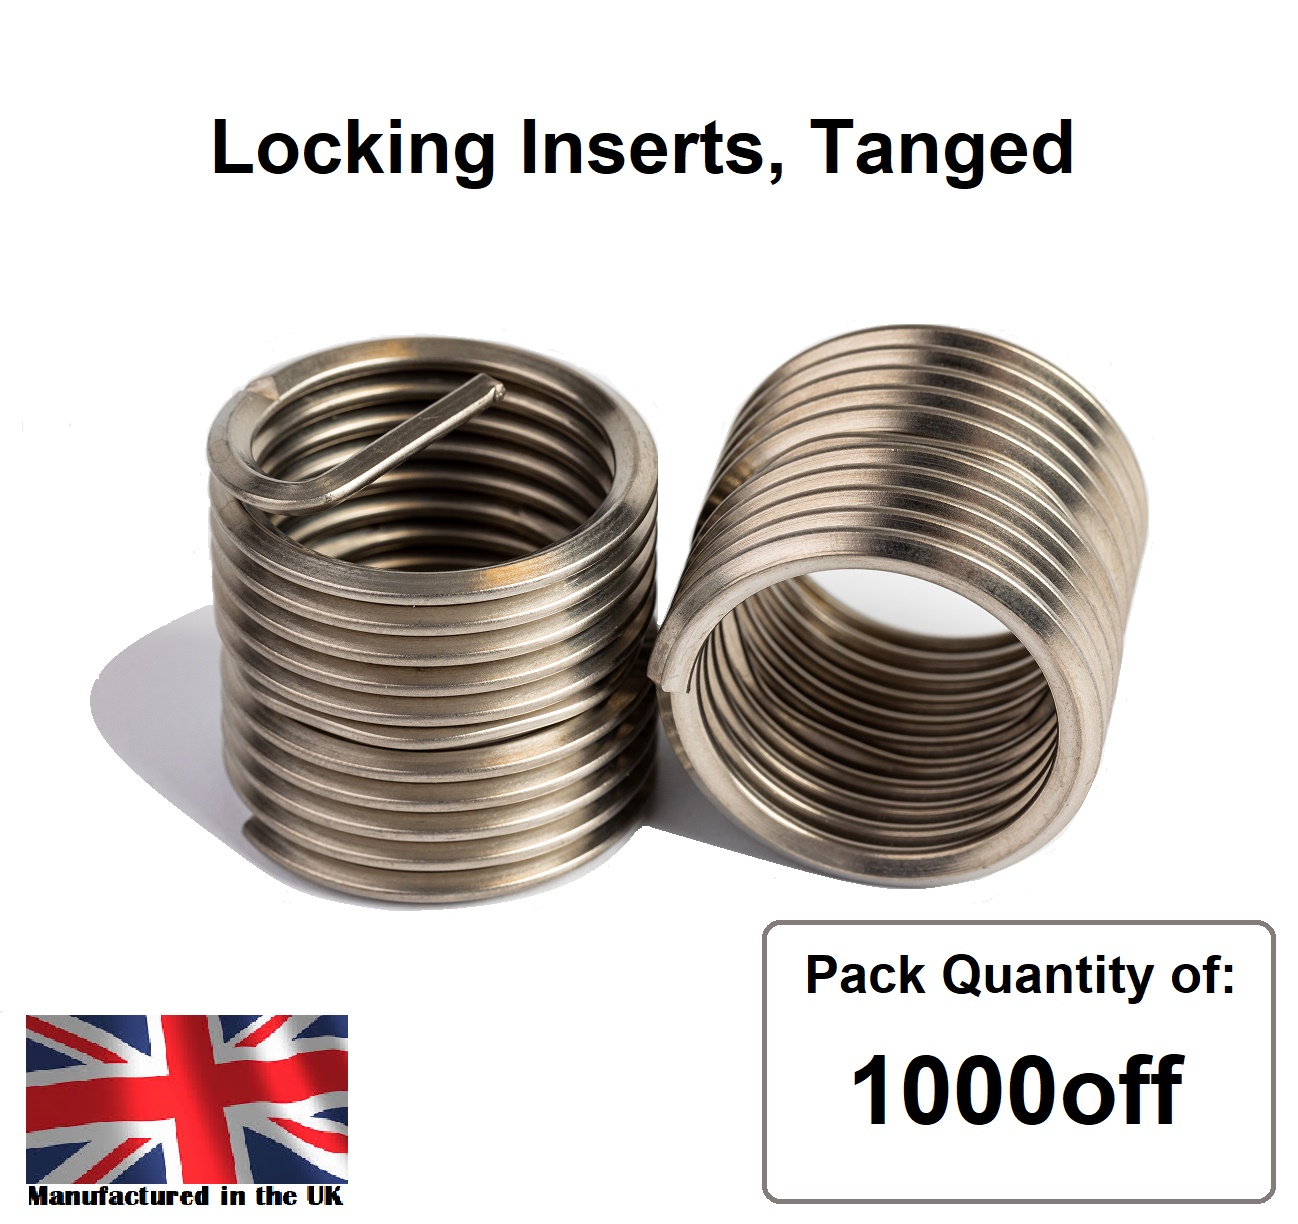 M14 x 2.0 x 2.5D Metric Coarse, LOCKING, Tanged, Wire Thread Repair Insert, 304/A2 Stainless (Pack 1000)